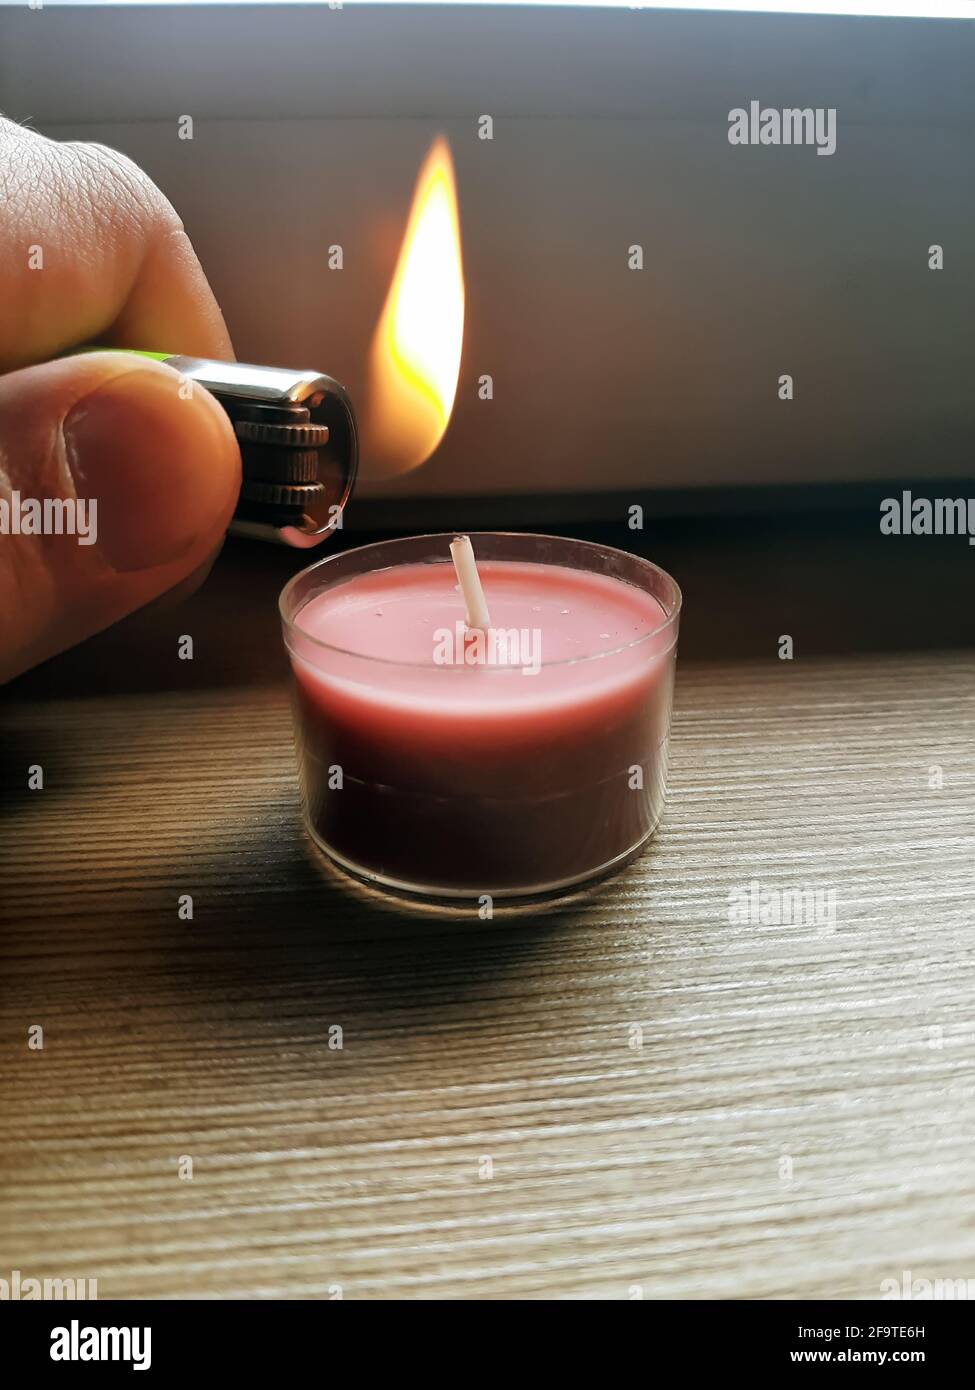 Lighting candle with a lighter. Hand holding lighter with flame. Stock Photo